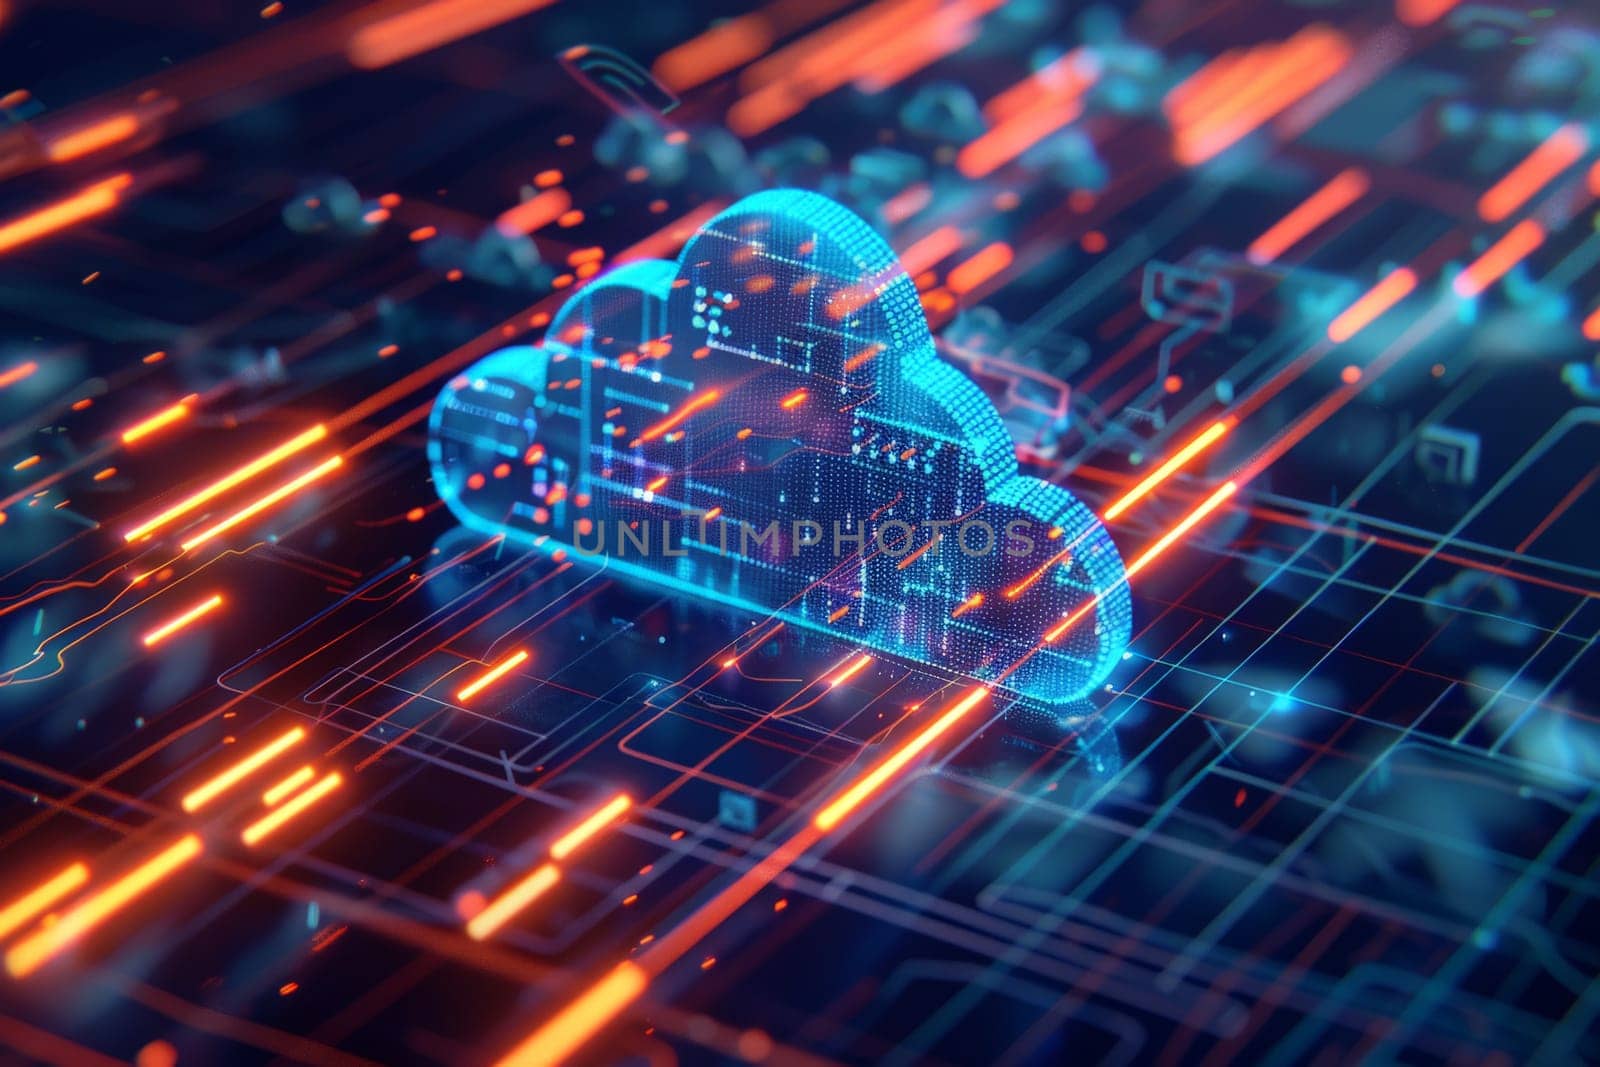 A cloud is shown in a computer screen with a bright orange background by nateemee